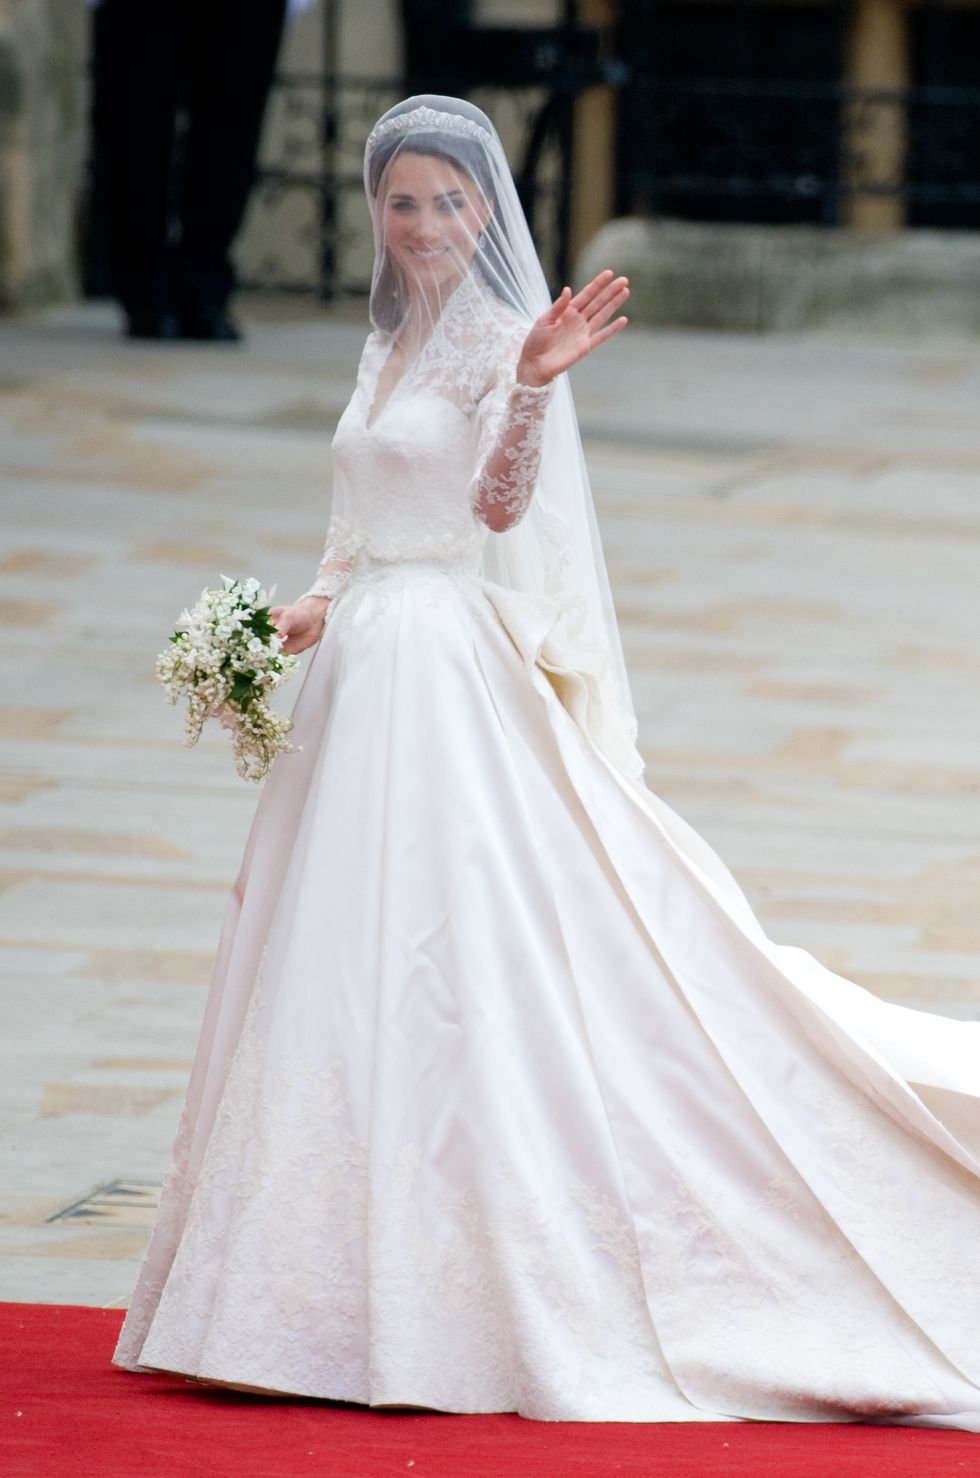 the wedding of prince william with catherine middleton westminster abbey